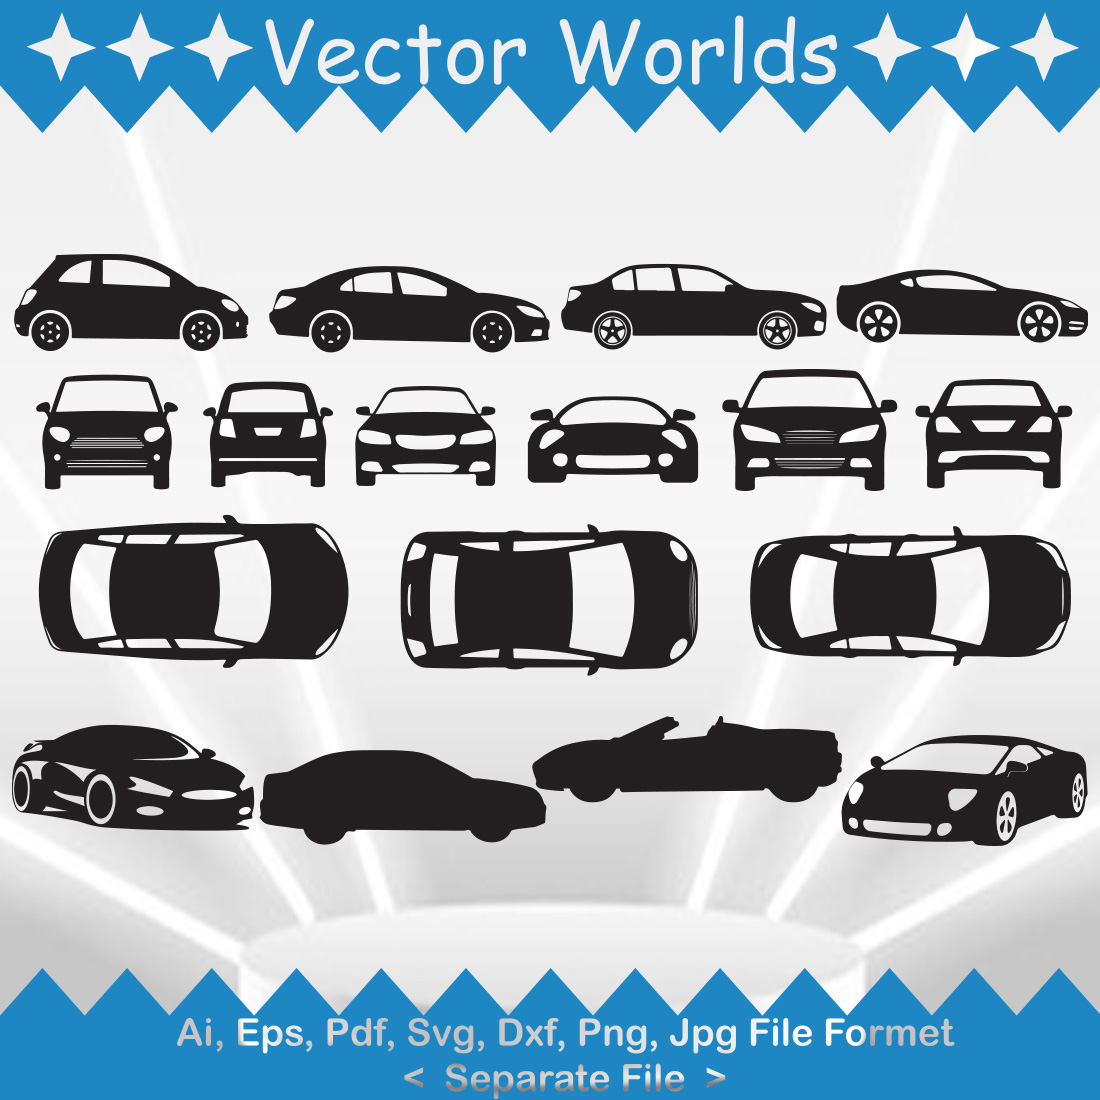 Pack of amazing car vector images.